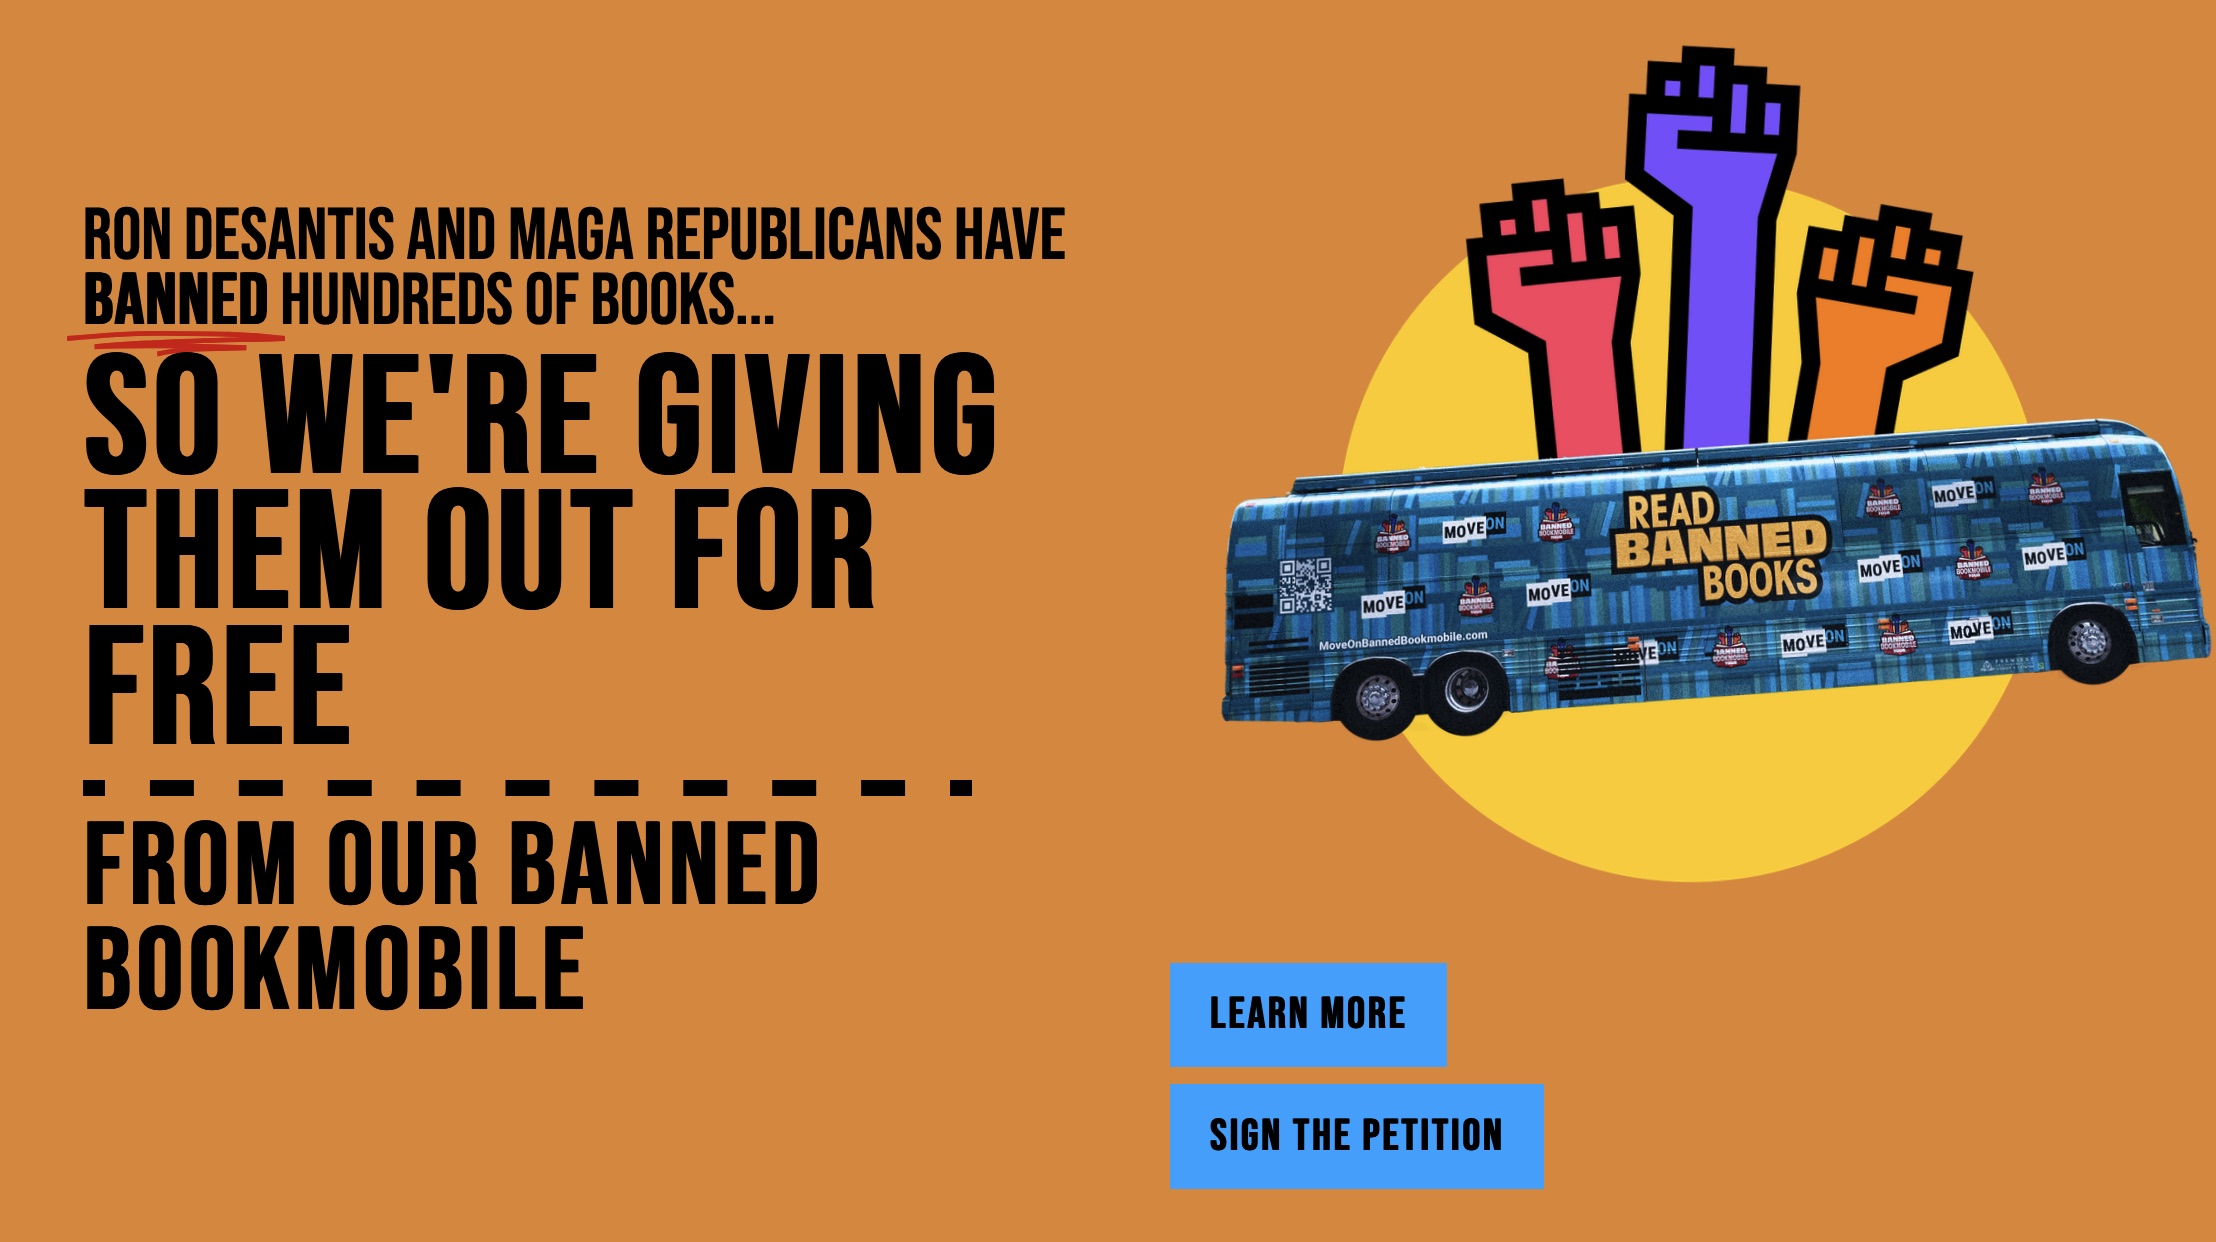 Graphic showing to the right a picture of a bus labeled Reid band books and bearing the moveon.org logo. To the left is text "Ron DeSantis, and Maga Republicans have banned hundreds of books… So we are giving them out for free from our Banned Bookmobile"